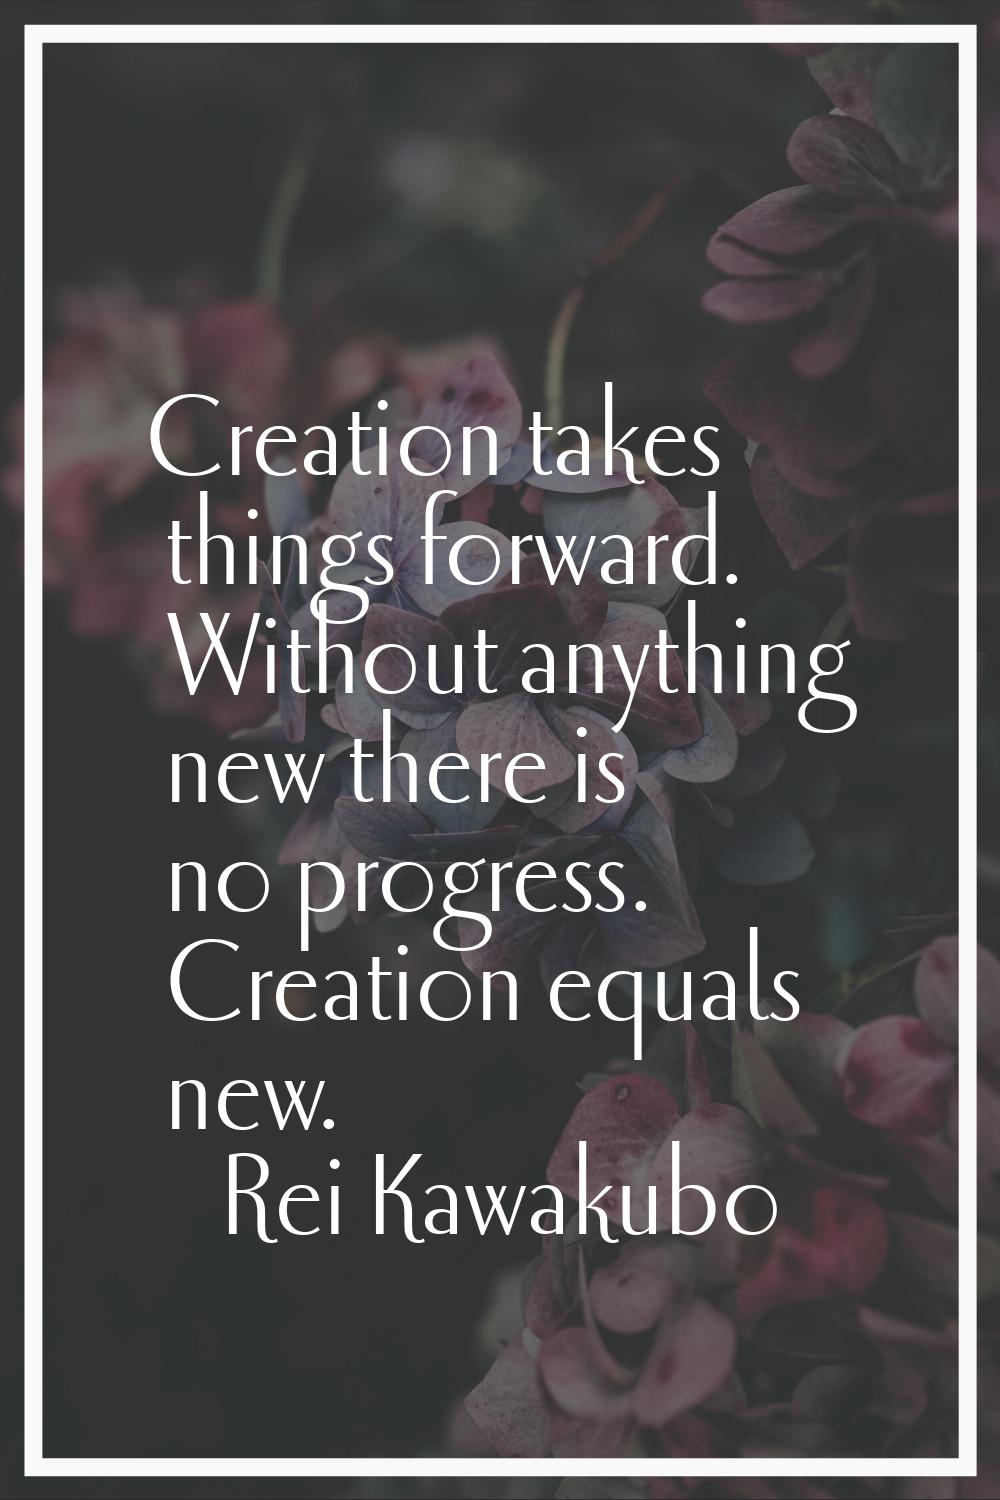 Creation takes things forward. Without anything new there is no progress. Creation equals new.